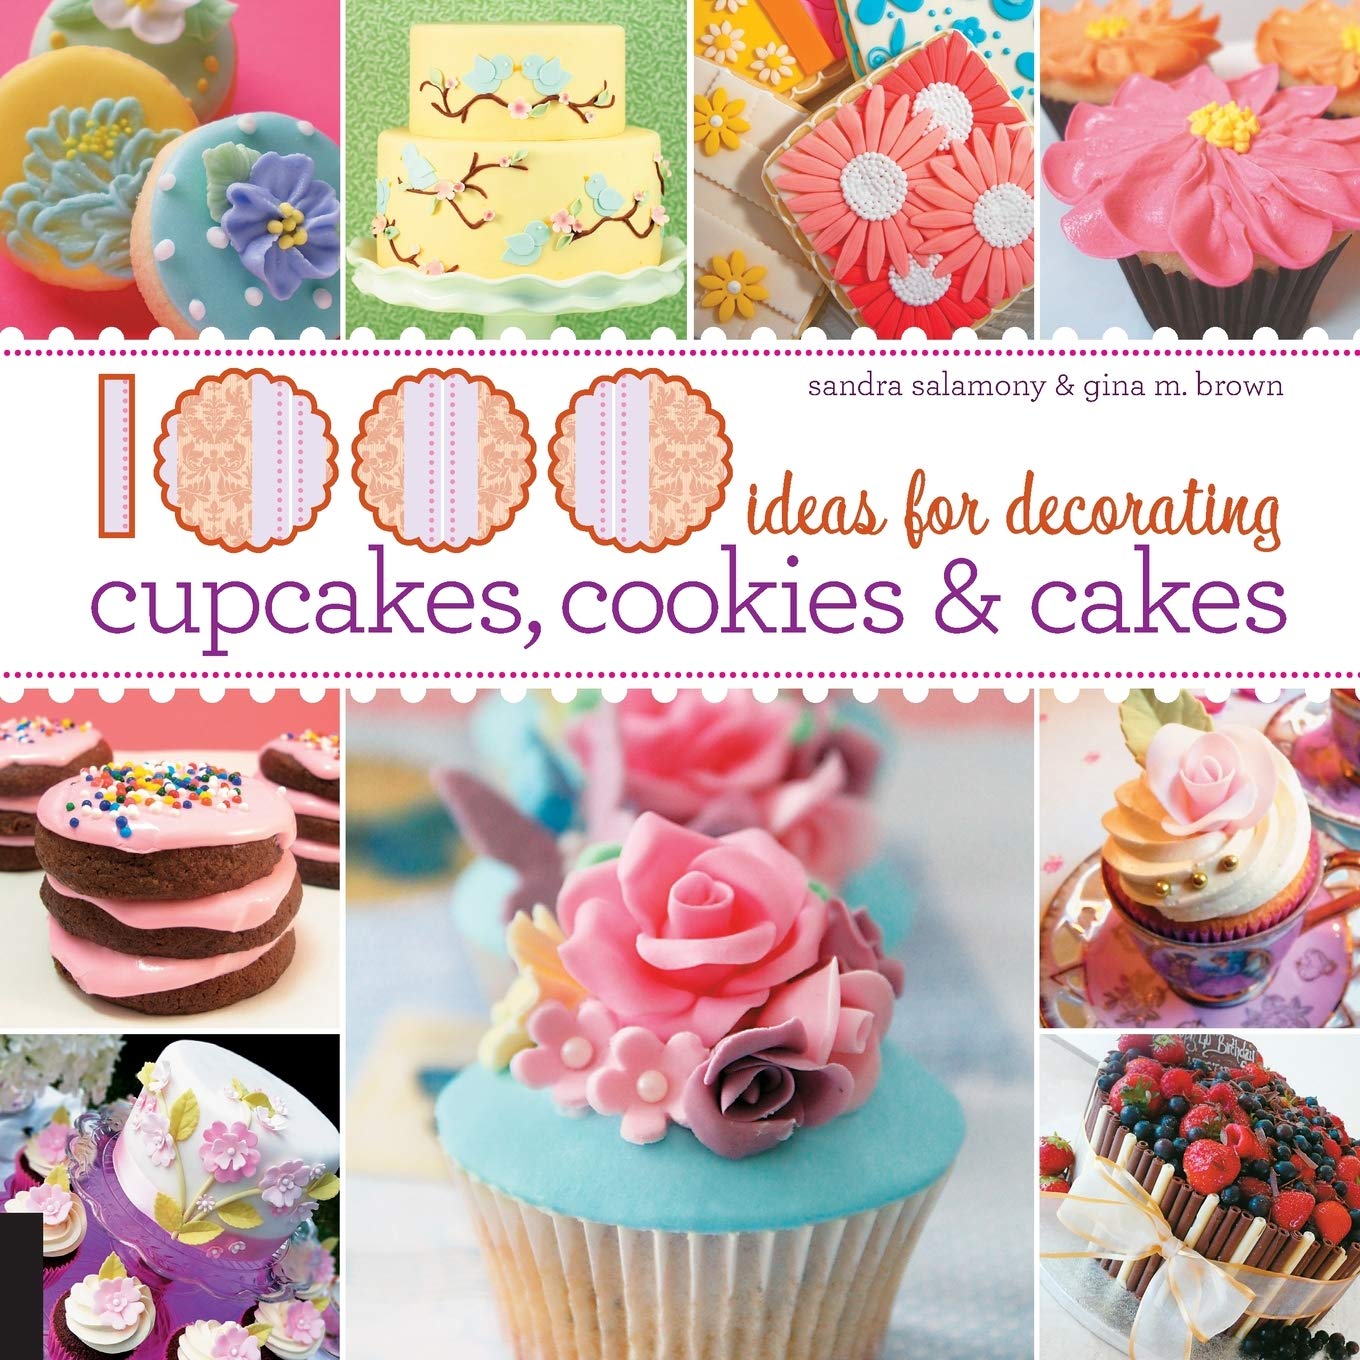 Book Cover 1,000 Ideas for Decorating Cupcakes, Cookies & Cakes